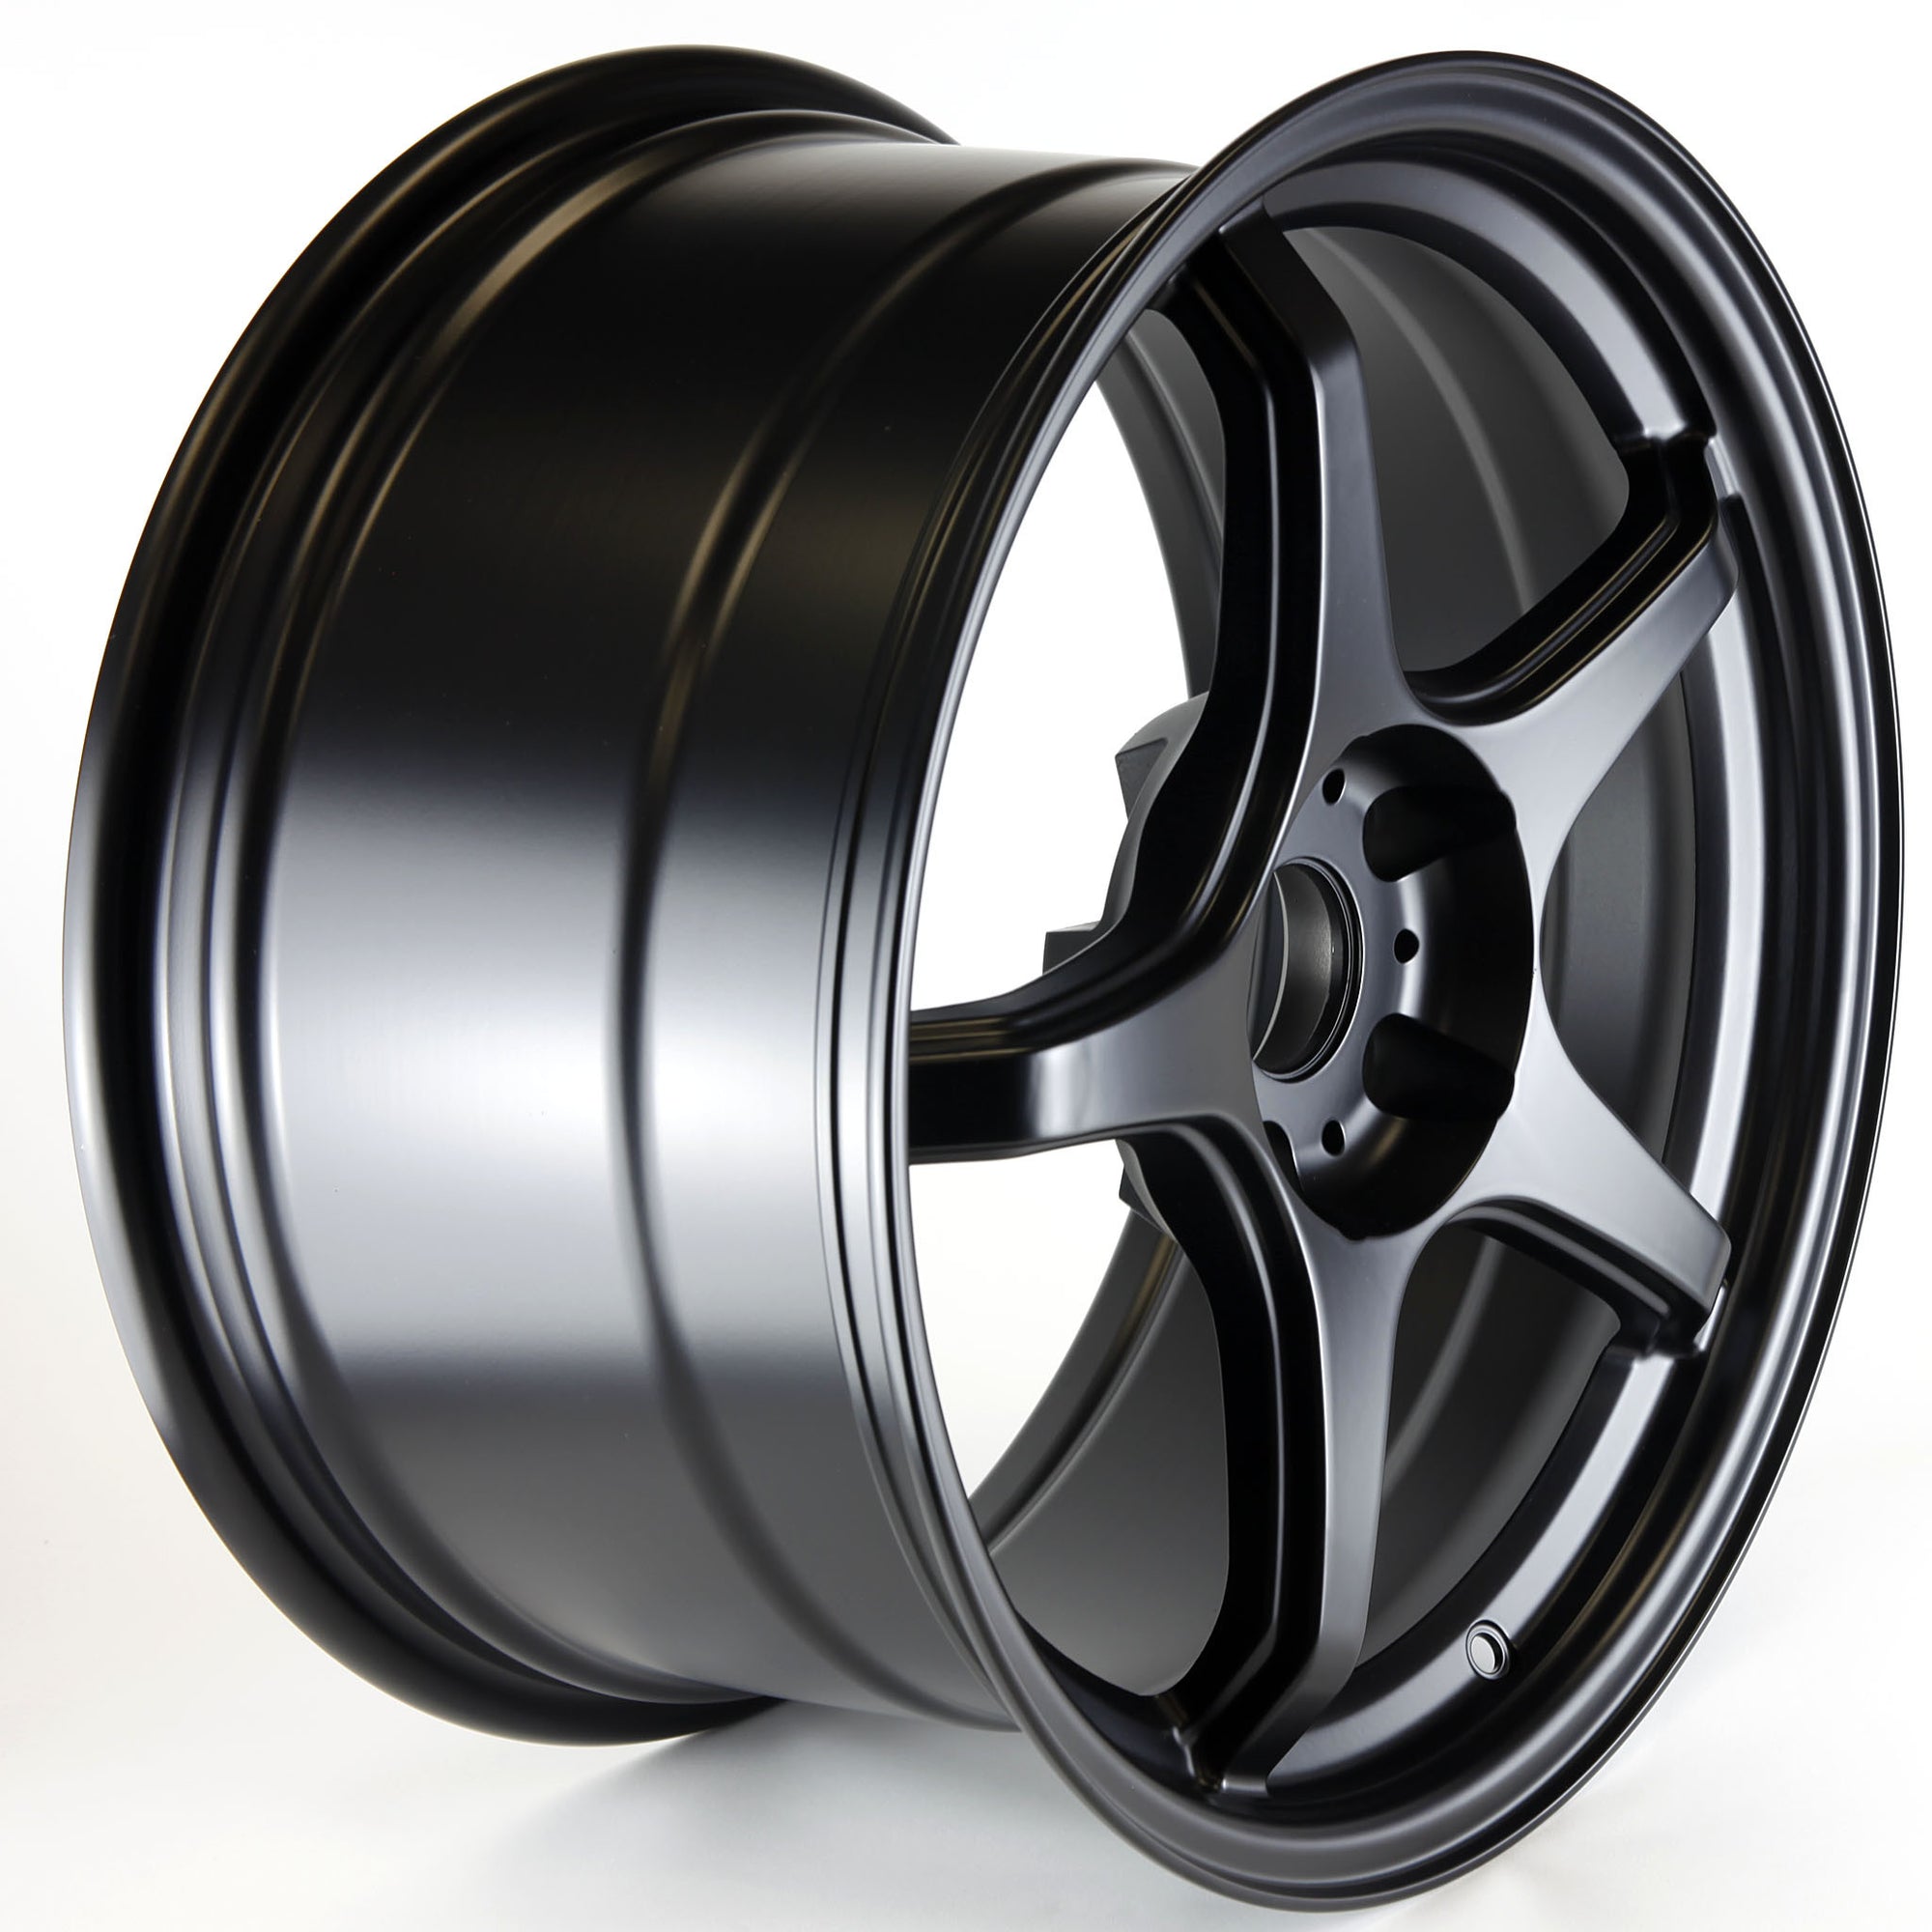 Mach V 18x9.5 Wicked Awesome Matte Black